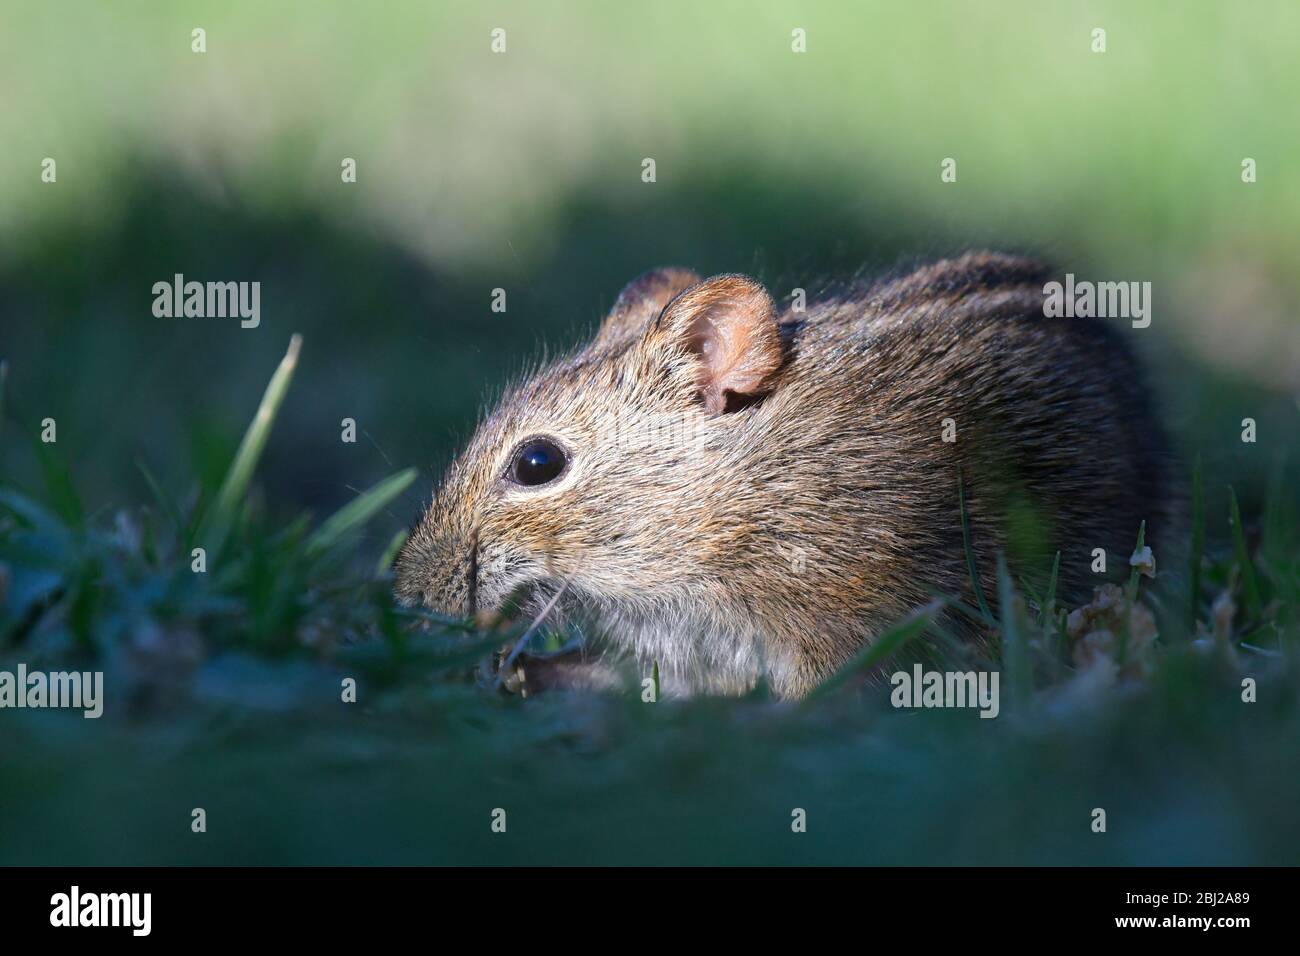 Natural life in Africa. Striped field mouse in green grass Stock Photo